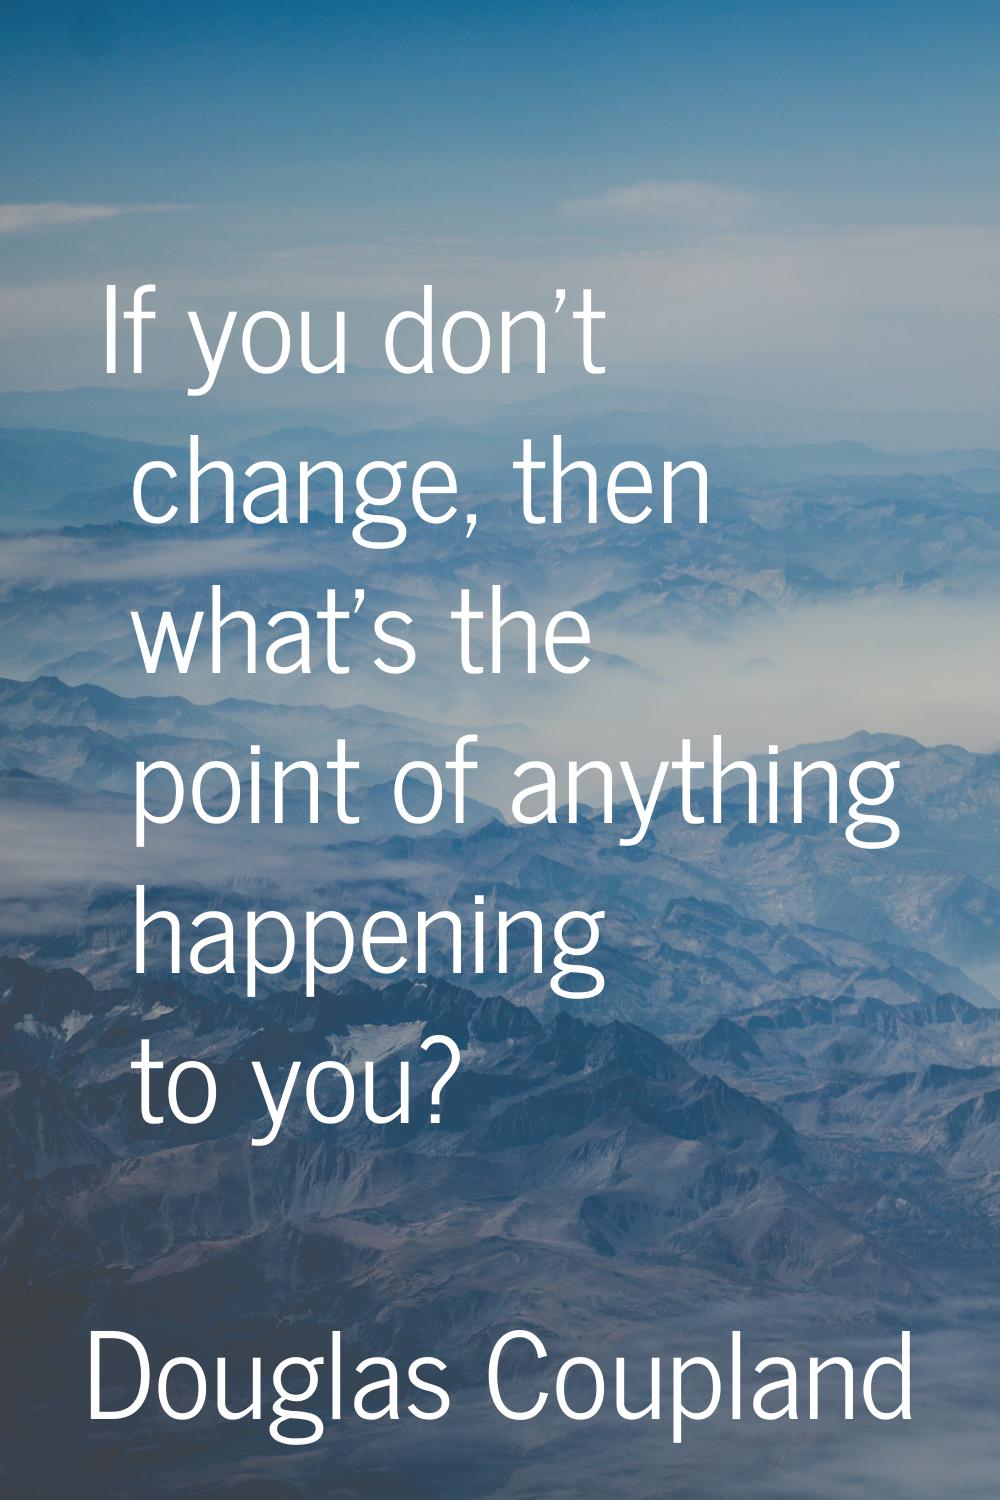 If you don't change, then what's the point of anything happening to you?